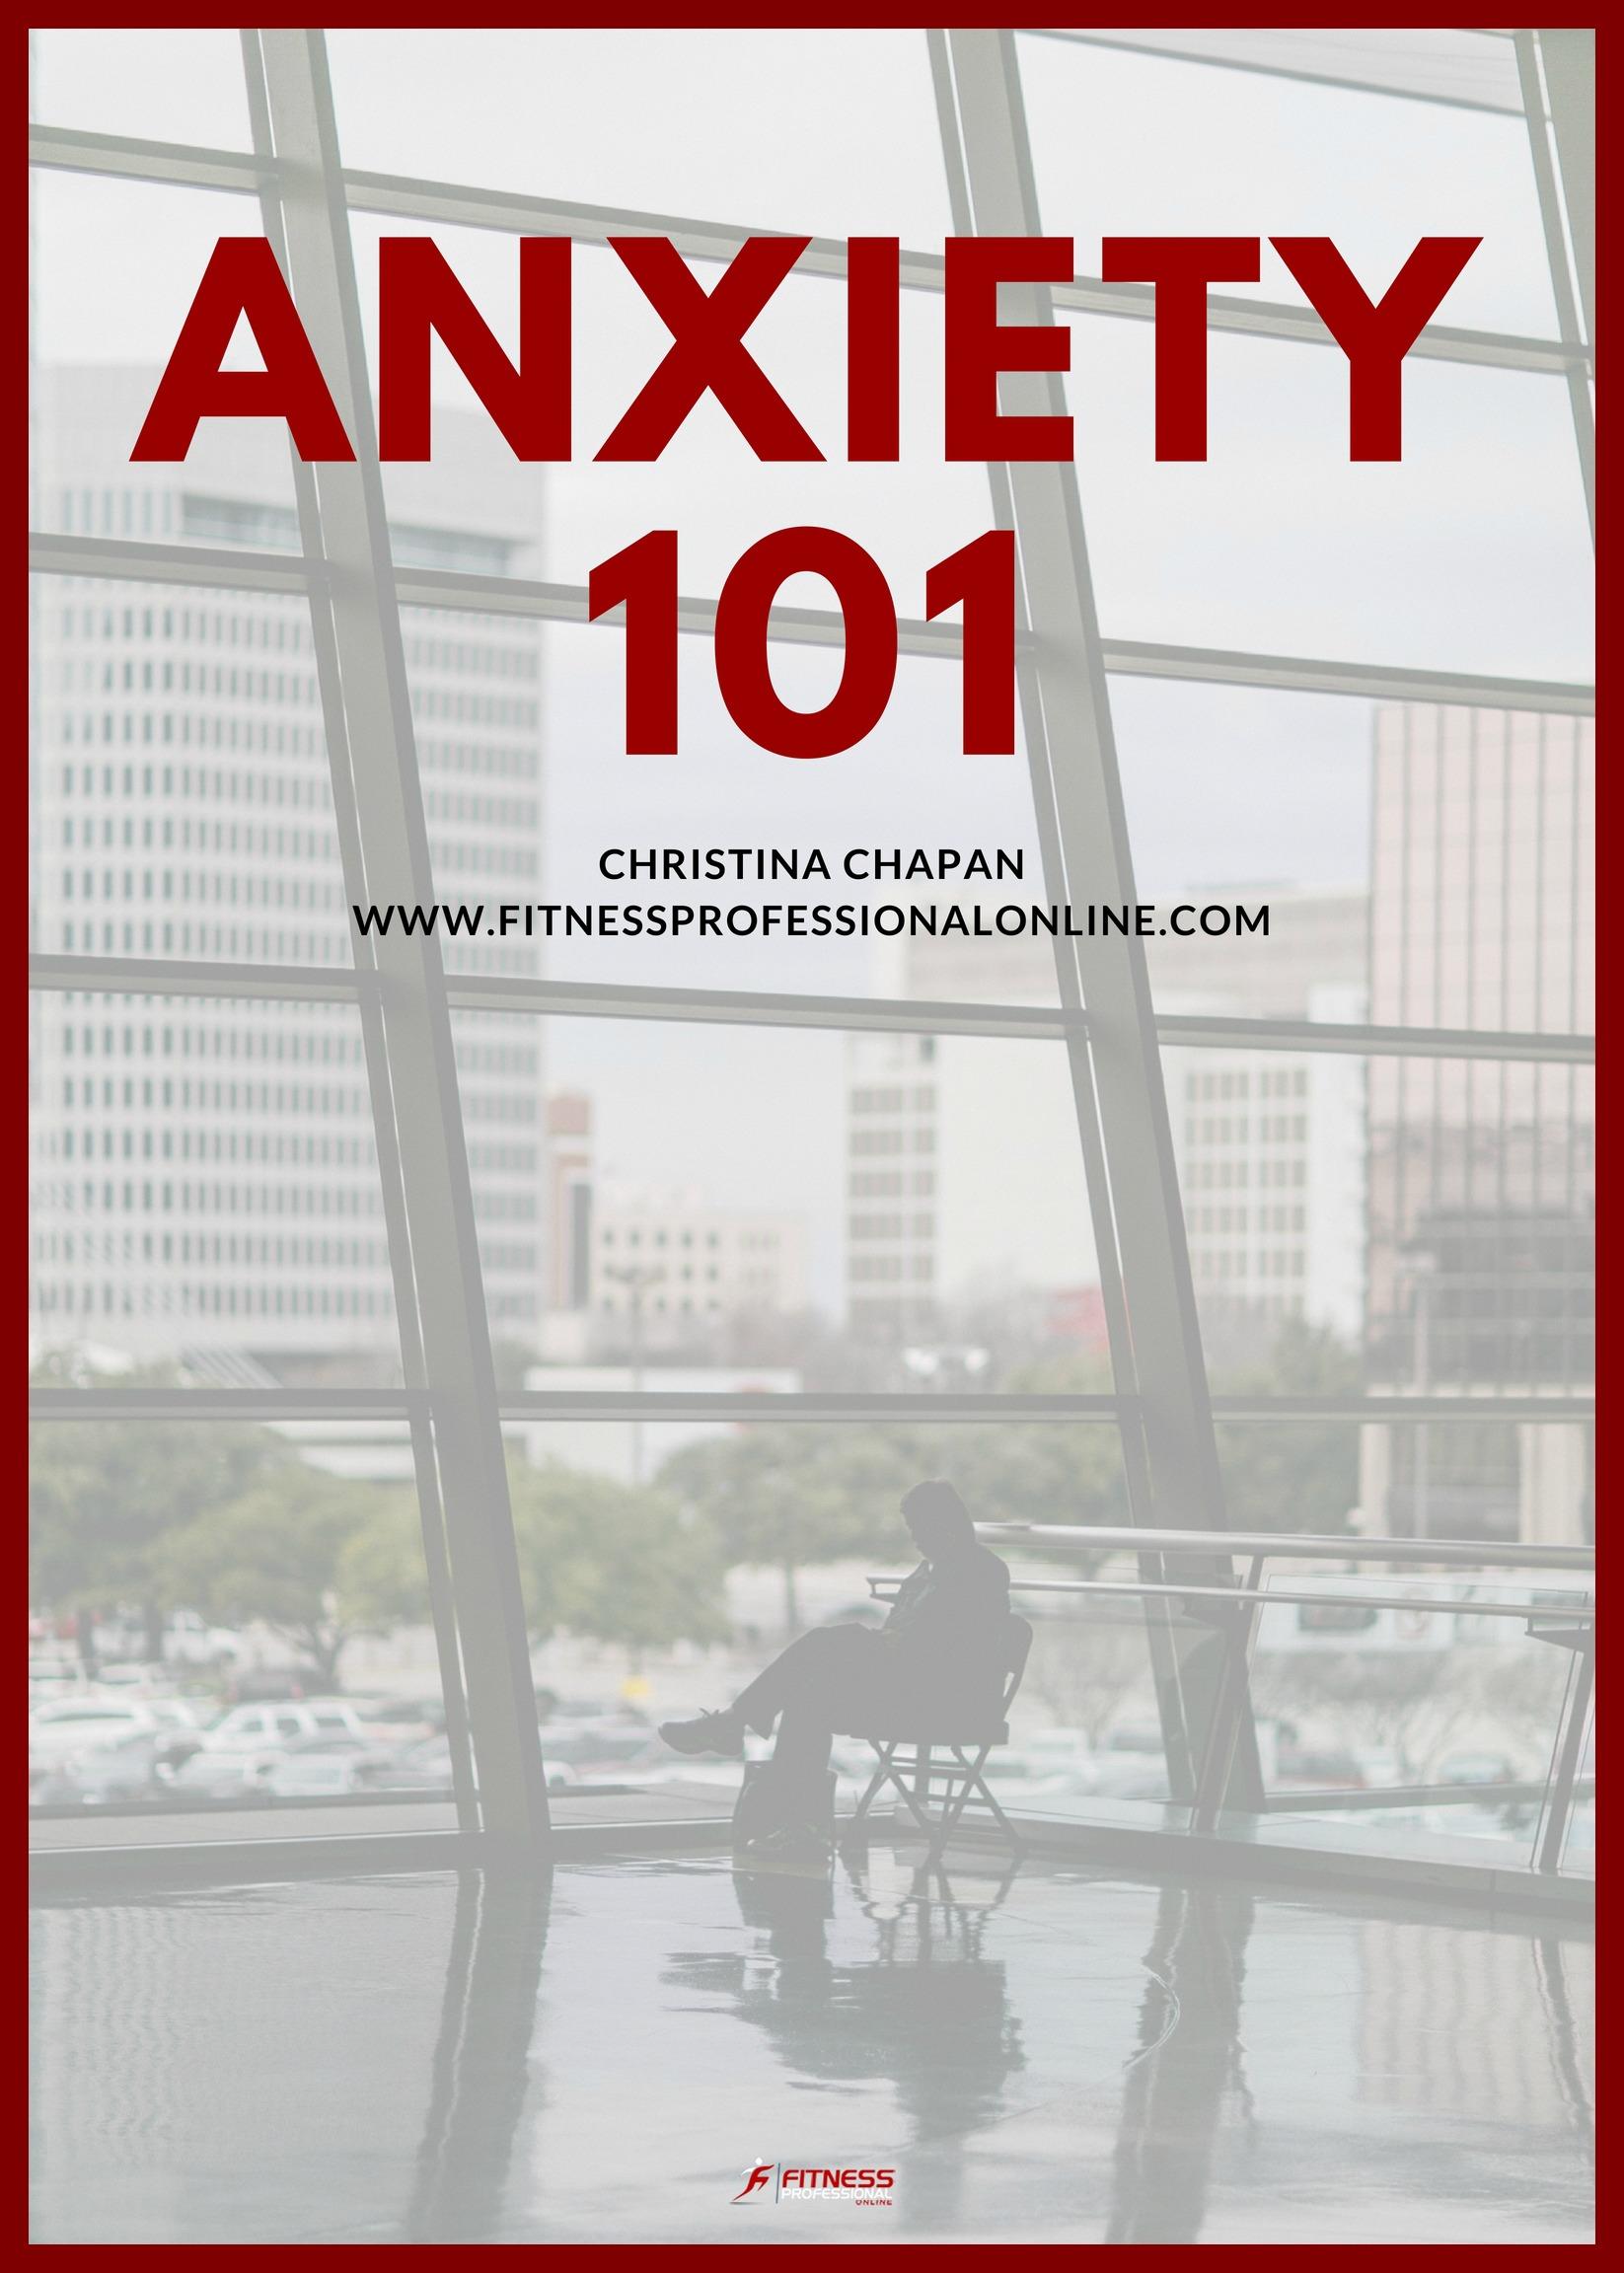 Knowing the ways to understand anxiety is the first step to decrease the stigma and help someone calm down faster. Fitness Professional Online